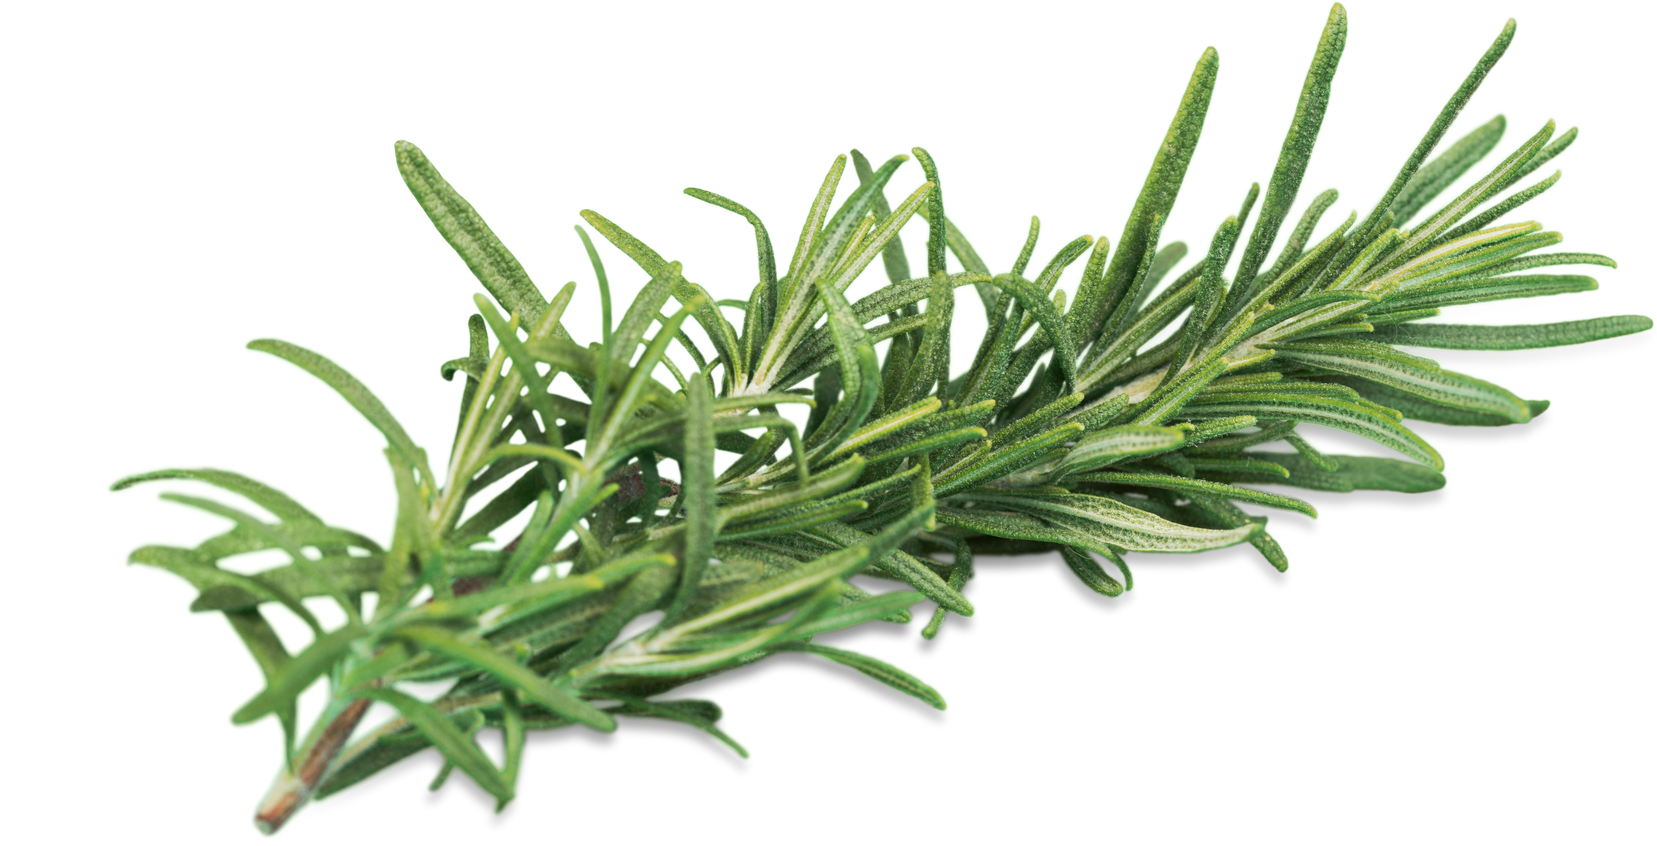 Rosemary Herb Sprig Isolated